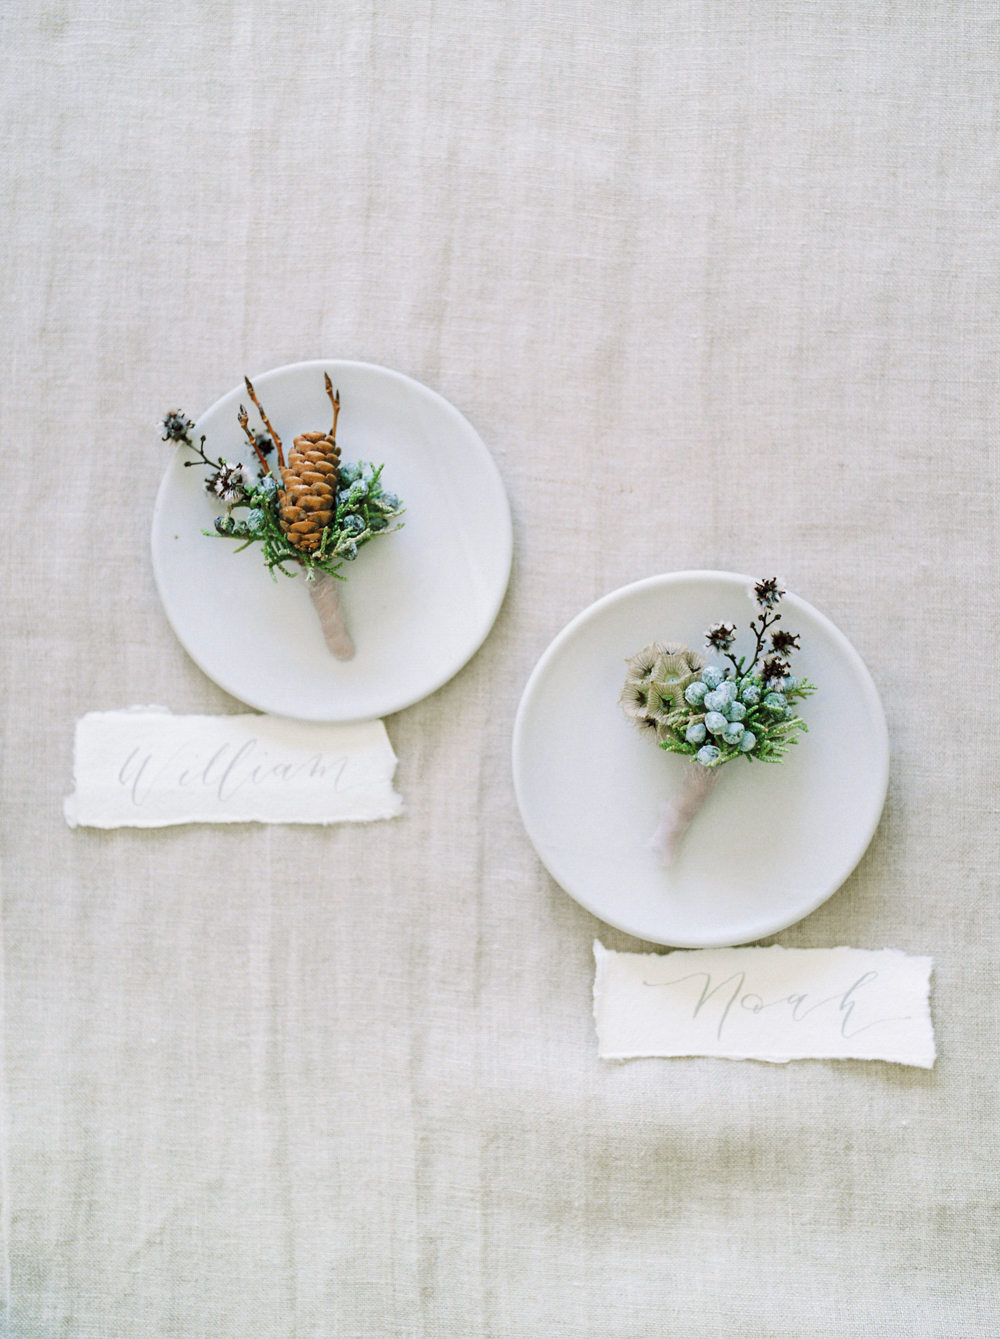 Winter wedding place cards